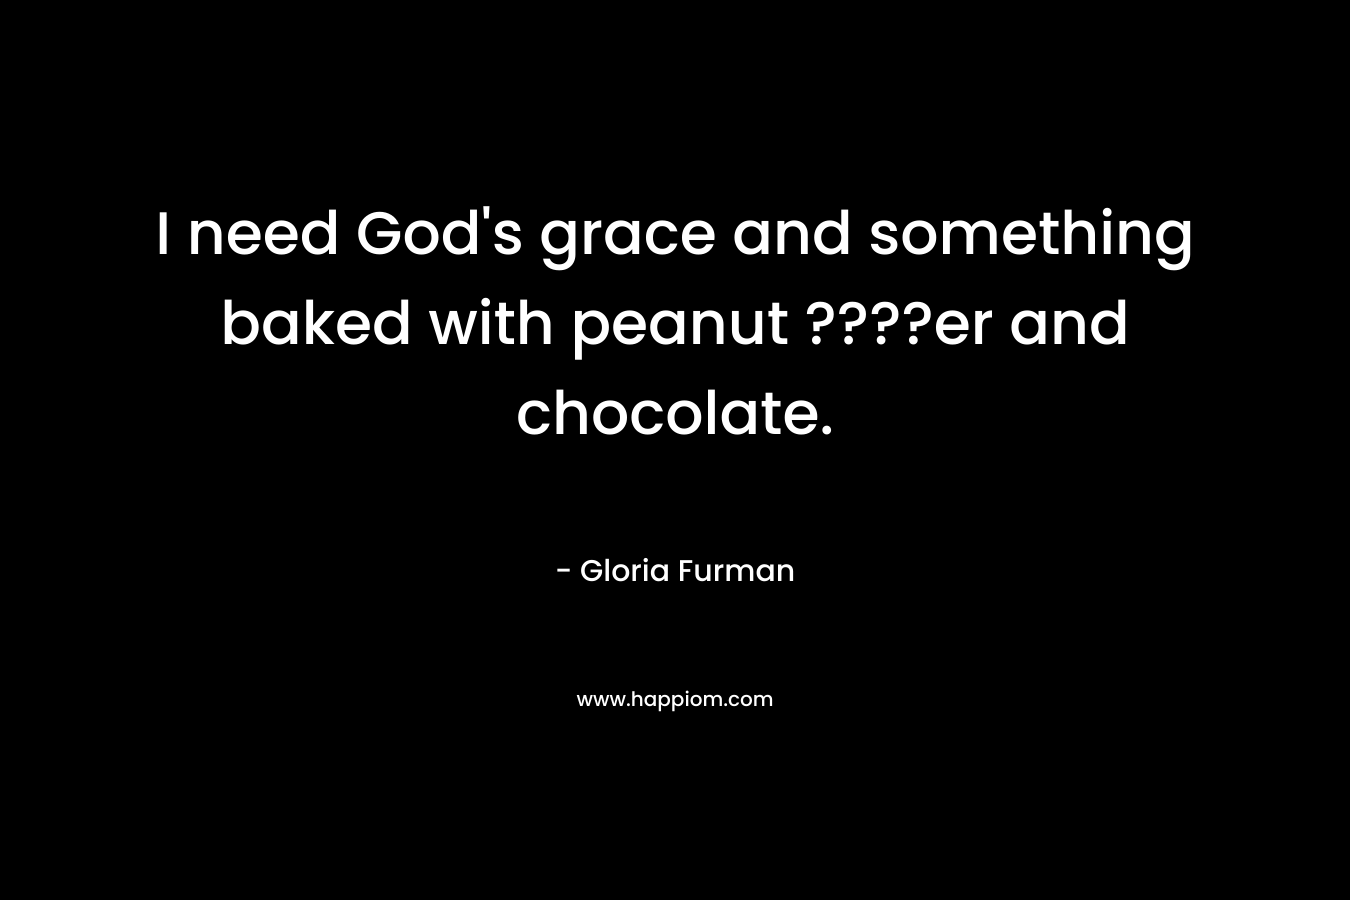 I need God’s grace and something baked with peanut ????er and chocolate. – Gloria Furman